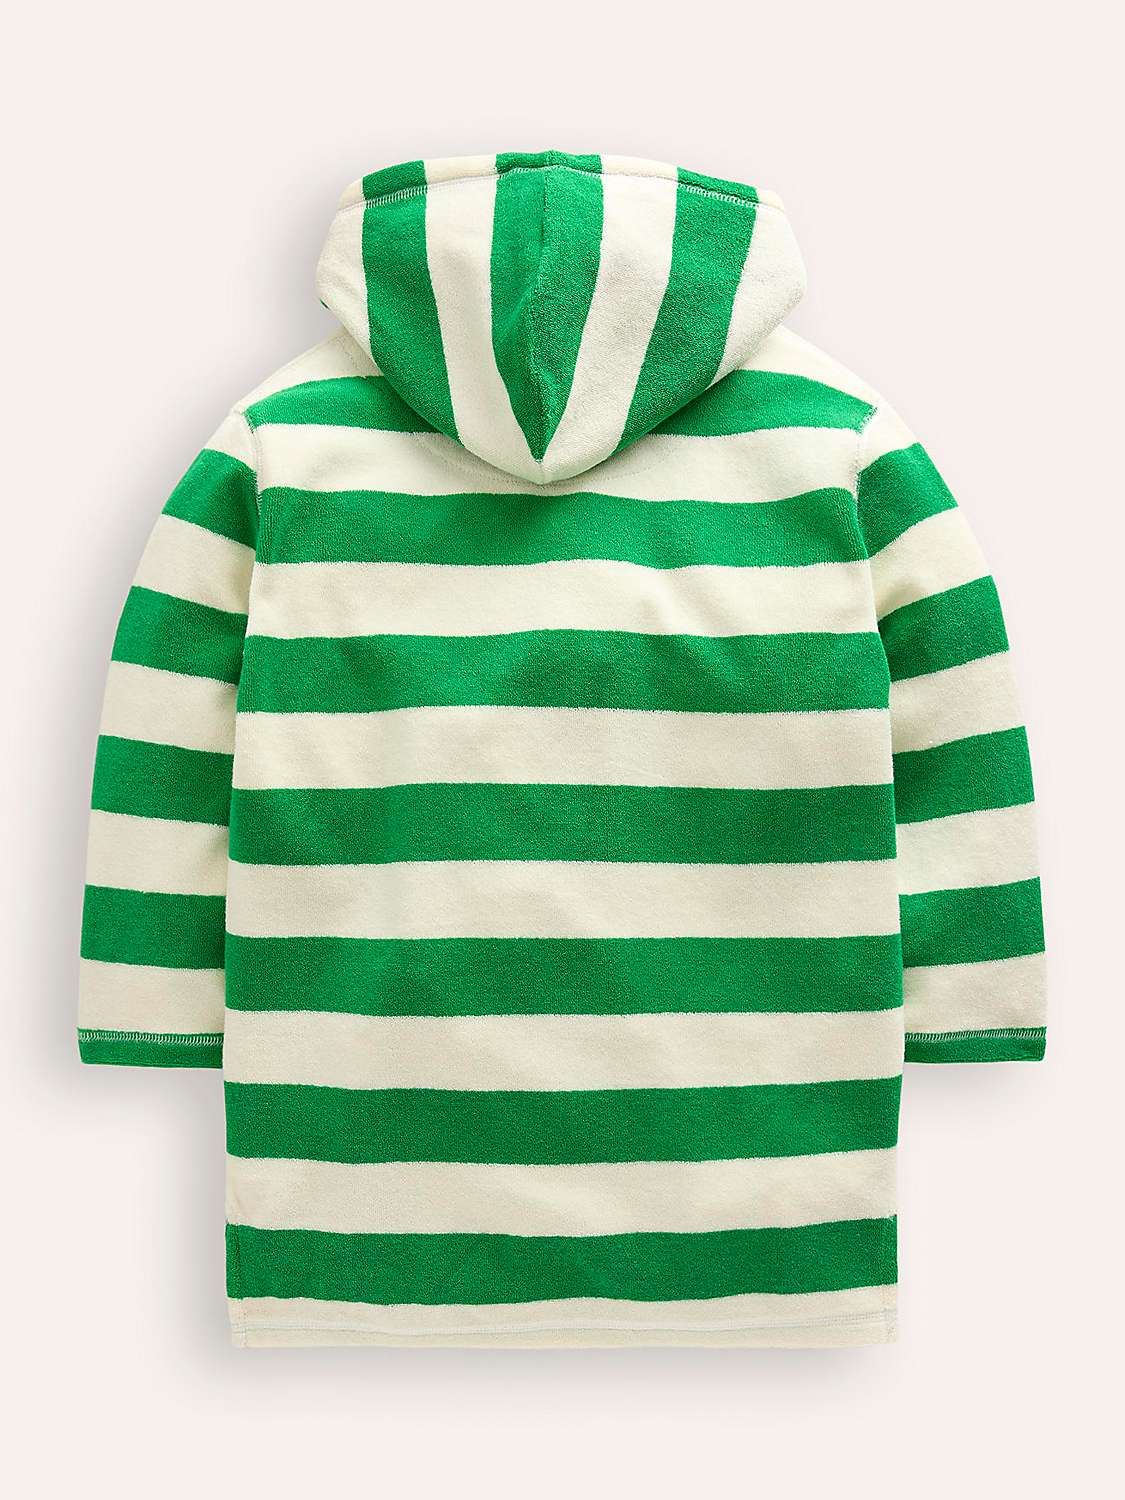 Buy Mini Boden Kids' Fish Applique and Stripe Towelling Poncho, Green/Ivory Online at johnlewis.com